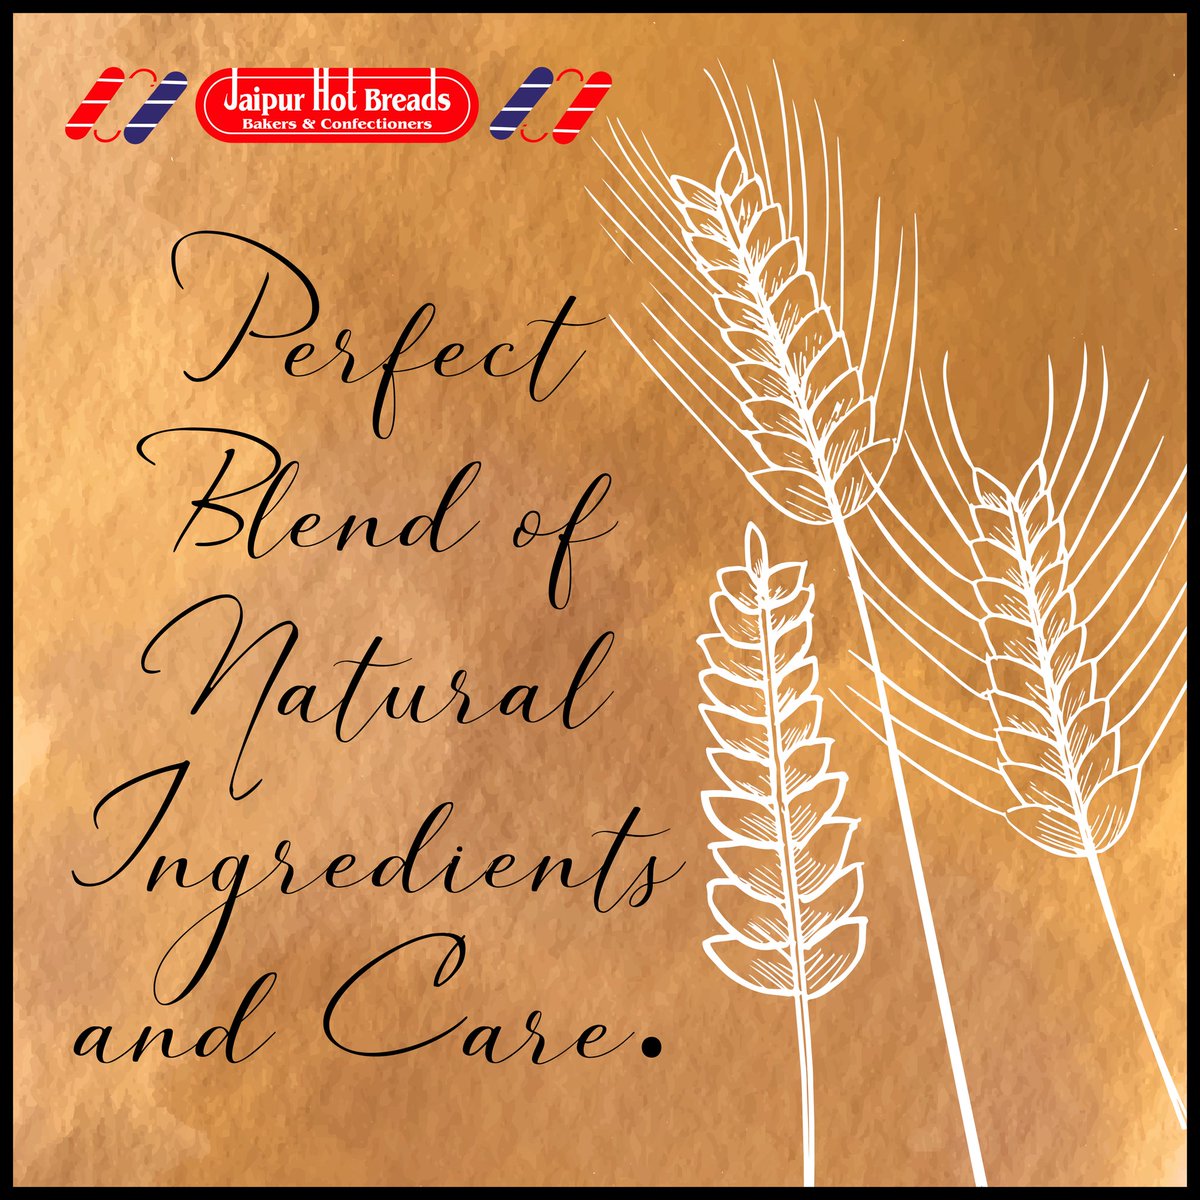 A perfect blend of natural ingredients and care only at Jaipur Hot Breads!

#jaipurhotbreads #hotbreads #jaipur #jaipircity #jaipurlove #pinkcity #jaipurpinkcity #jaipurfood #jaipurfoodblogger #igersjaipur #natural #care #naturalingredients #bakery #baker #jaipurdiaries #food